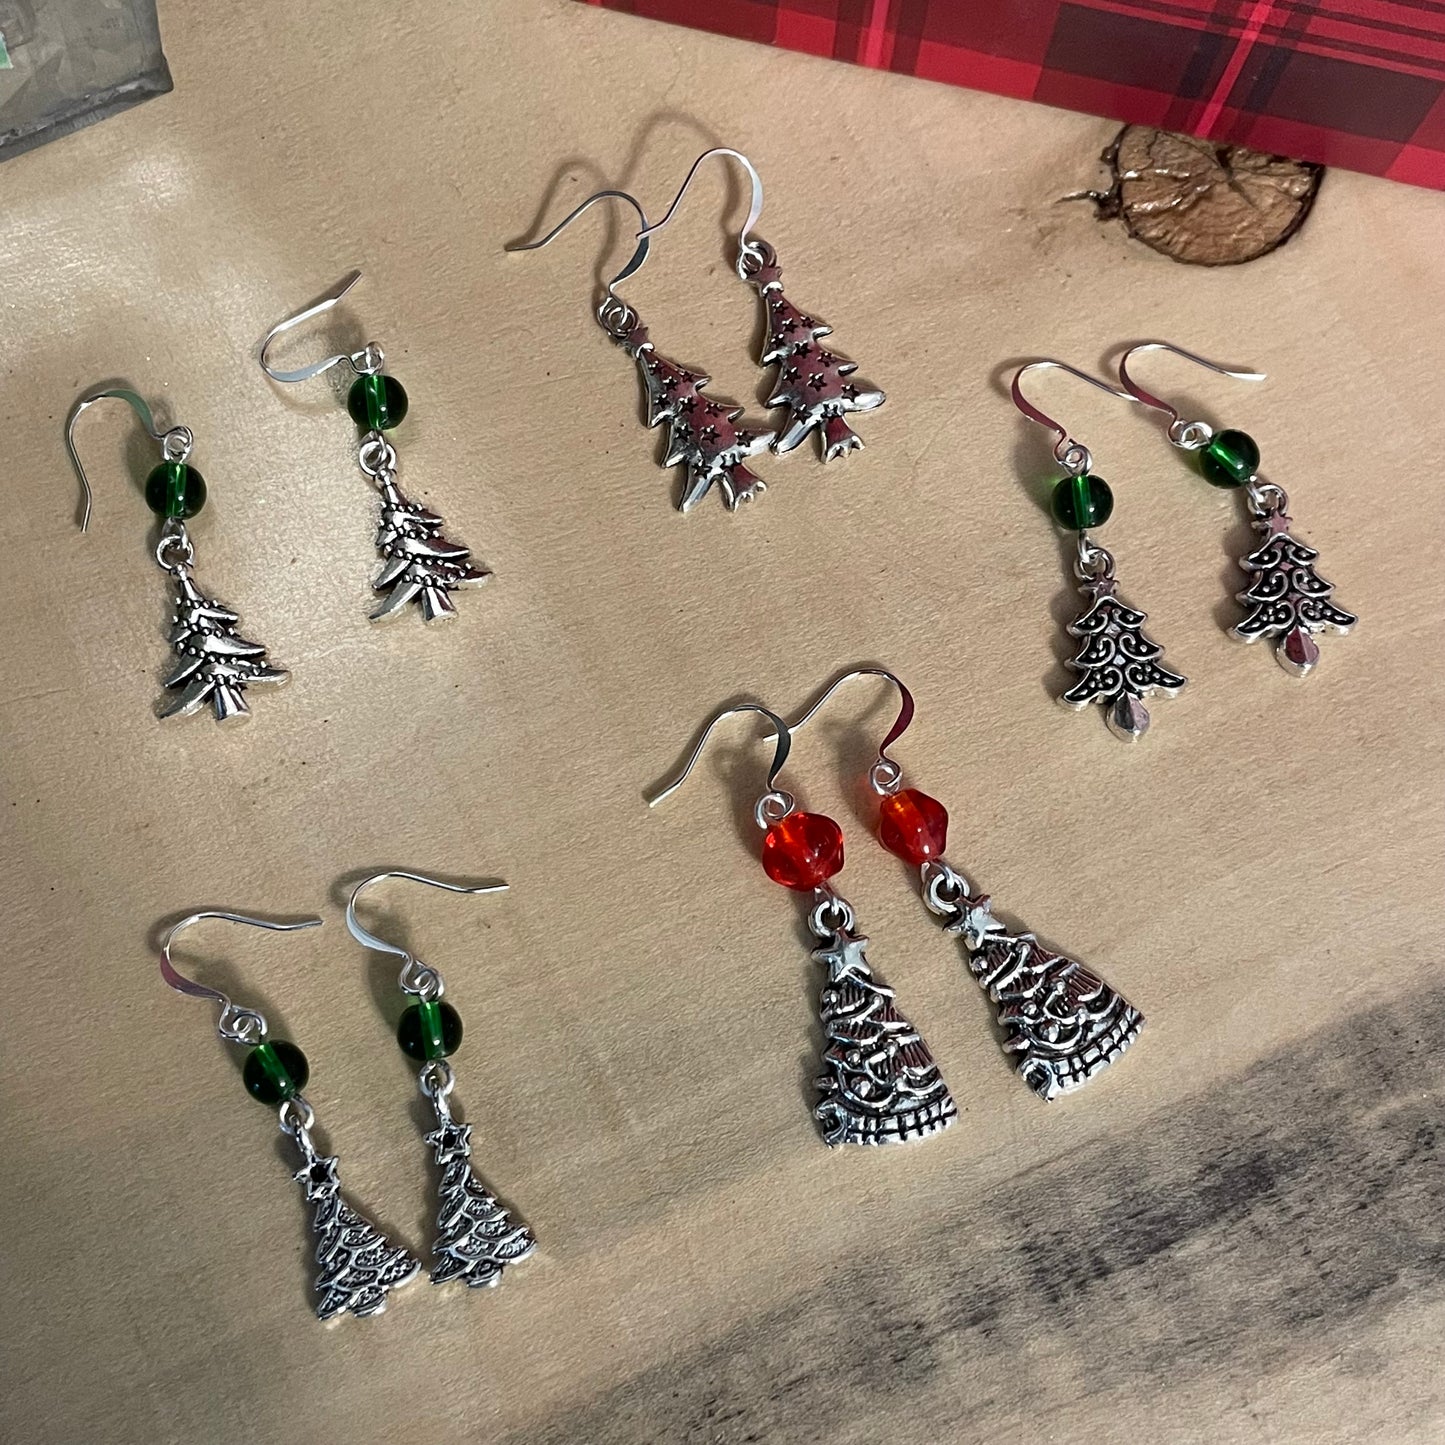 Handmade Christmas Tree With Star Charm Earrings Round Green Glass Bead Accent Mixed Metal Holiday Secret Santa Gift Idea